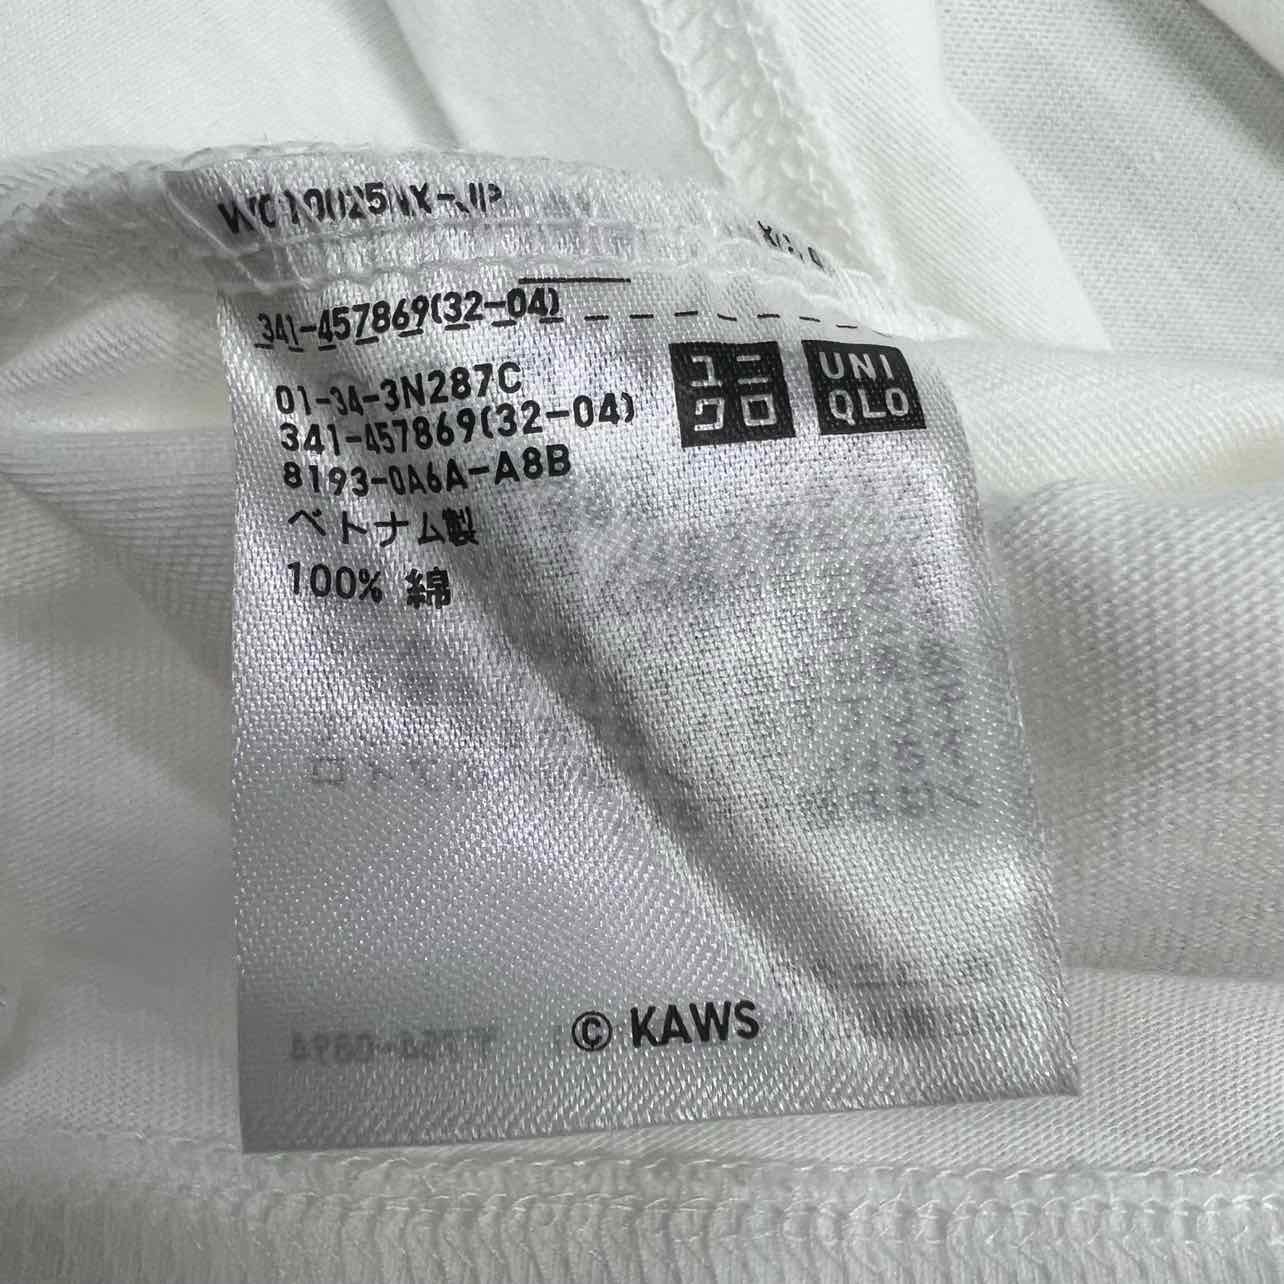 Uniqlo T-Shirt "KAWS PEACE FOR ALL" White New Size L